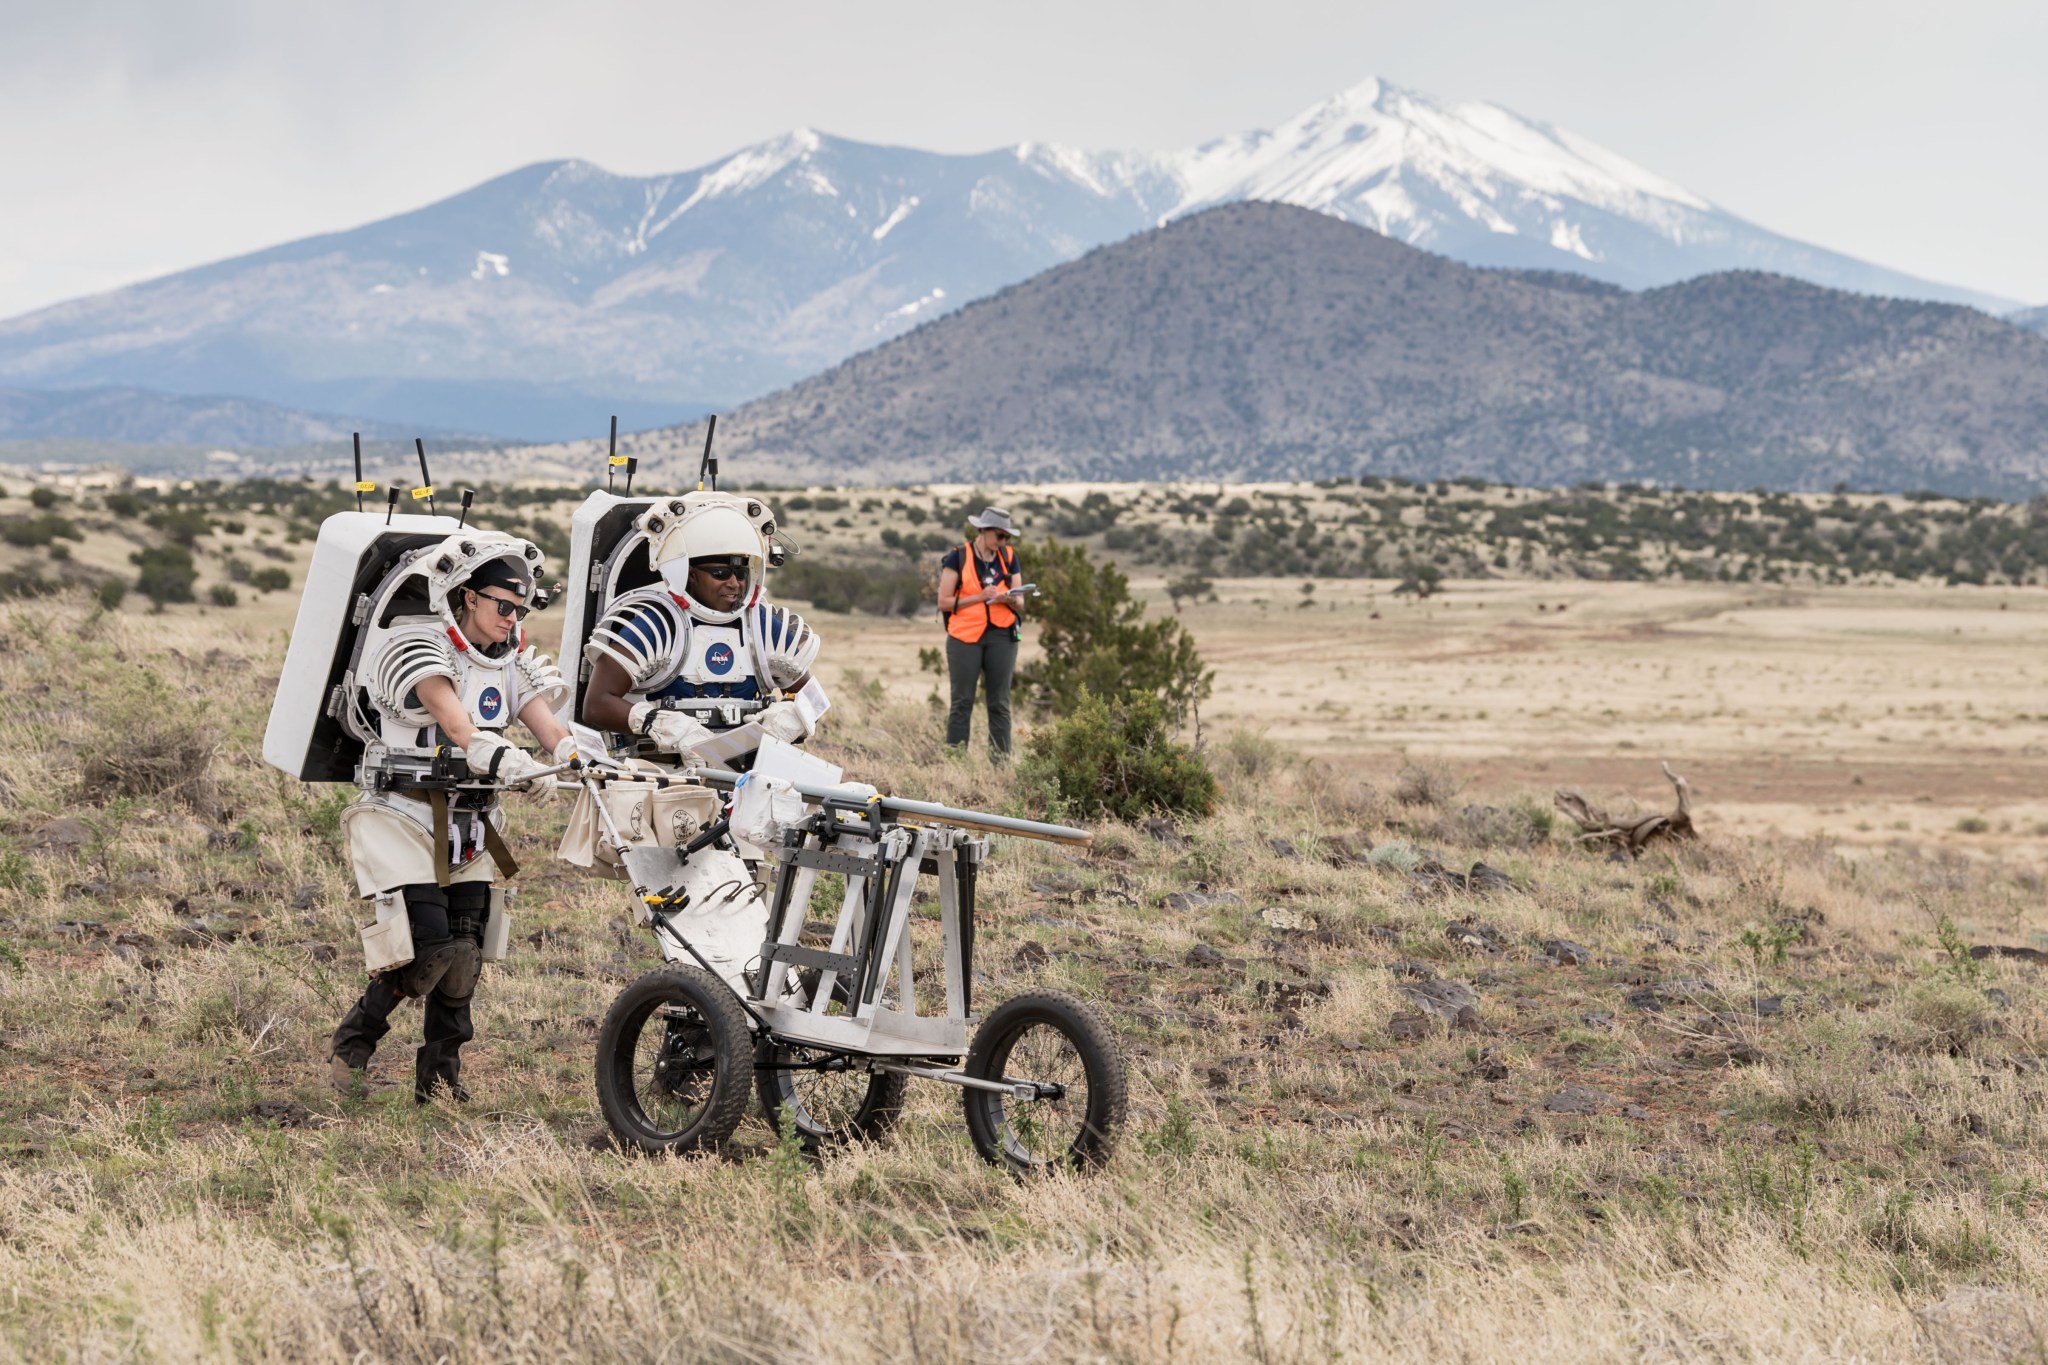 NASA astronauts Kate Rubins and Andre Douglas push a tool cart loaded with lunar tools through the San Francisco Volcanic Field north of Flagstaff, Arizona, as they practice moonwalking operations for Artemis III.